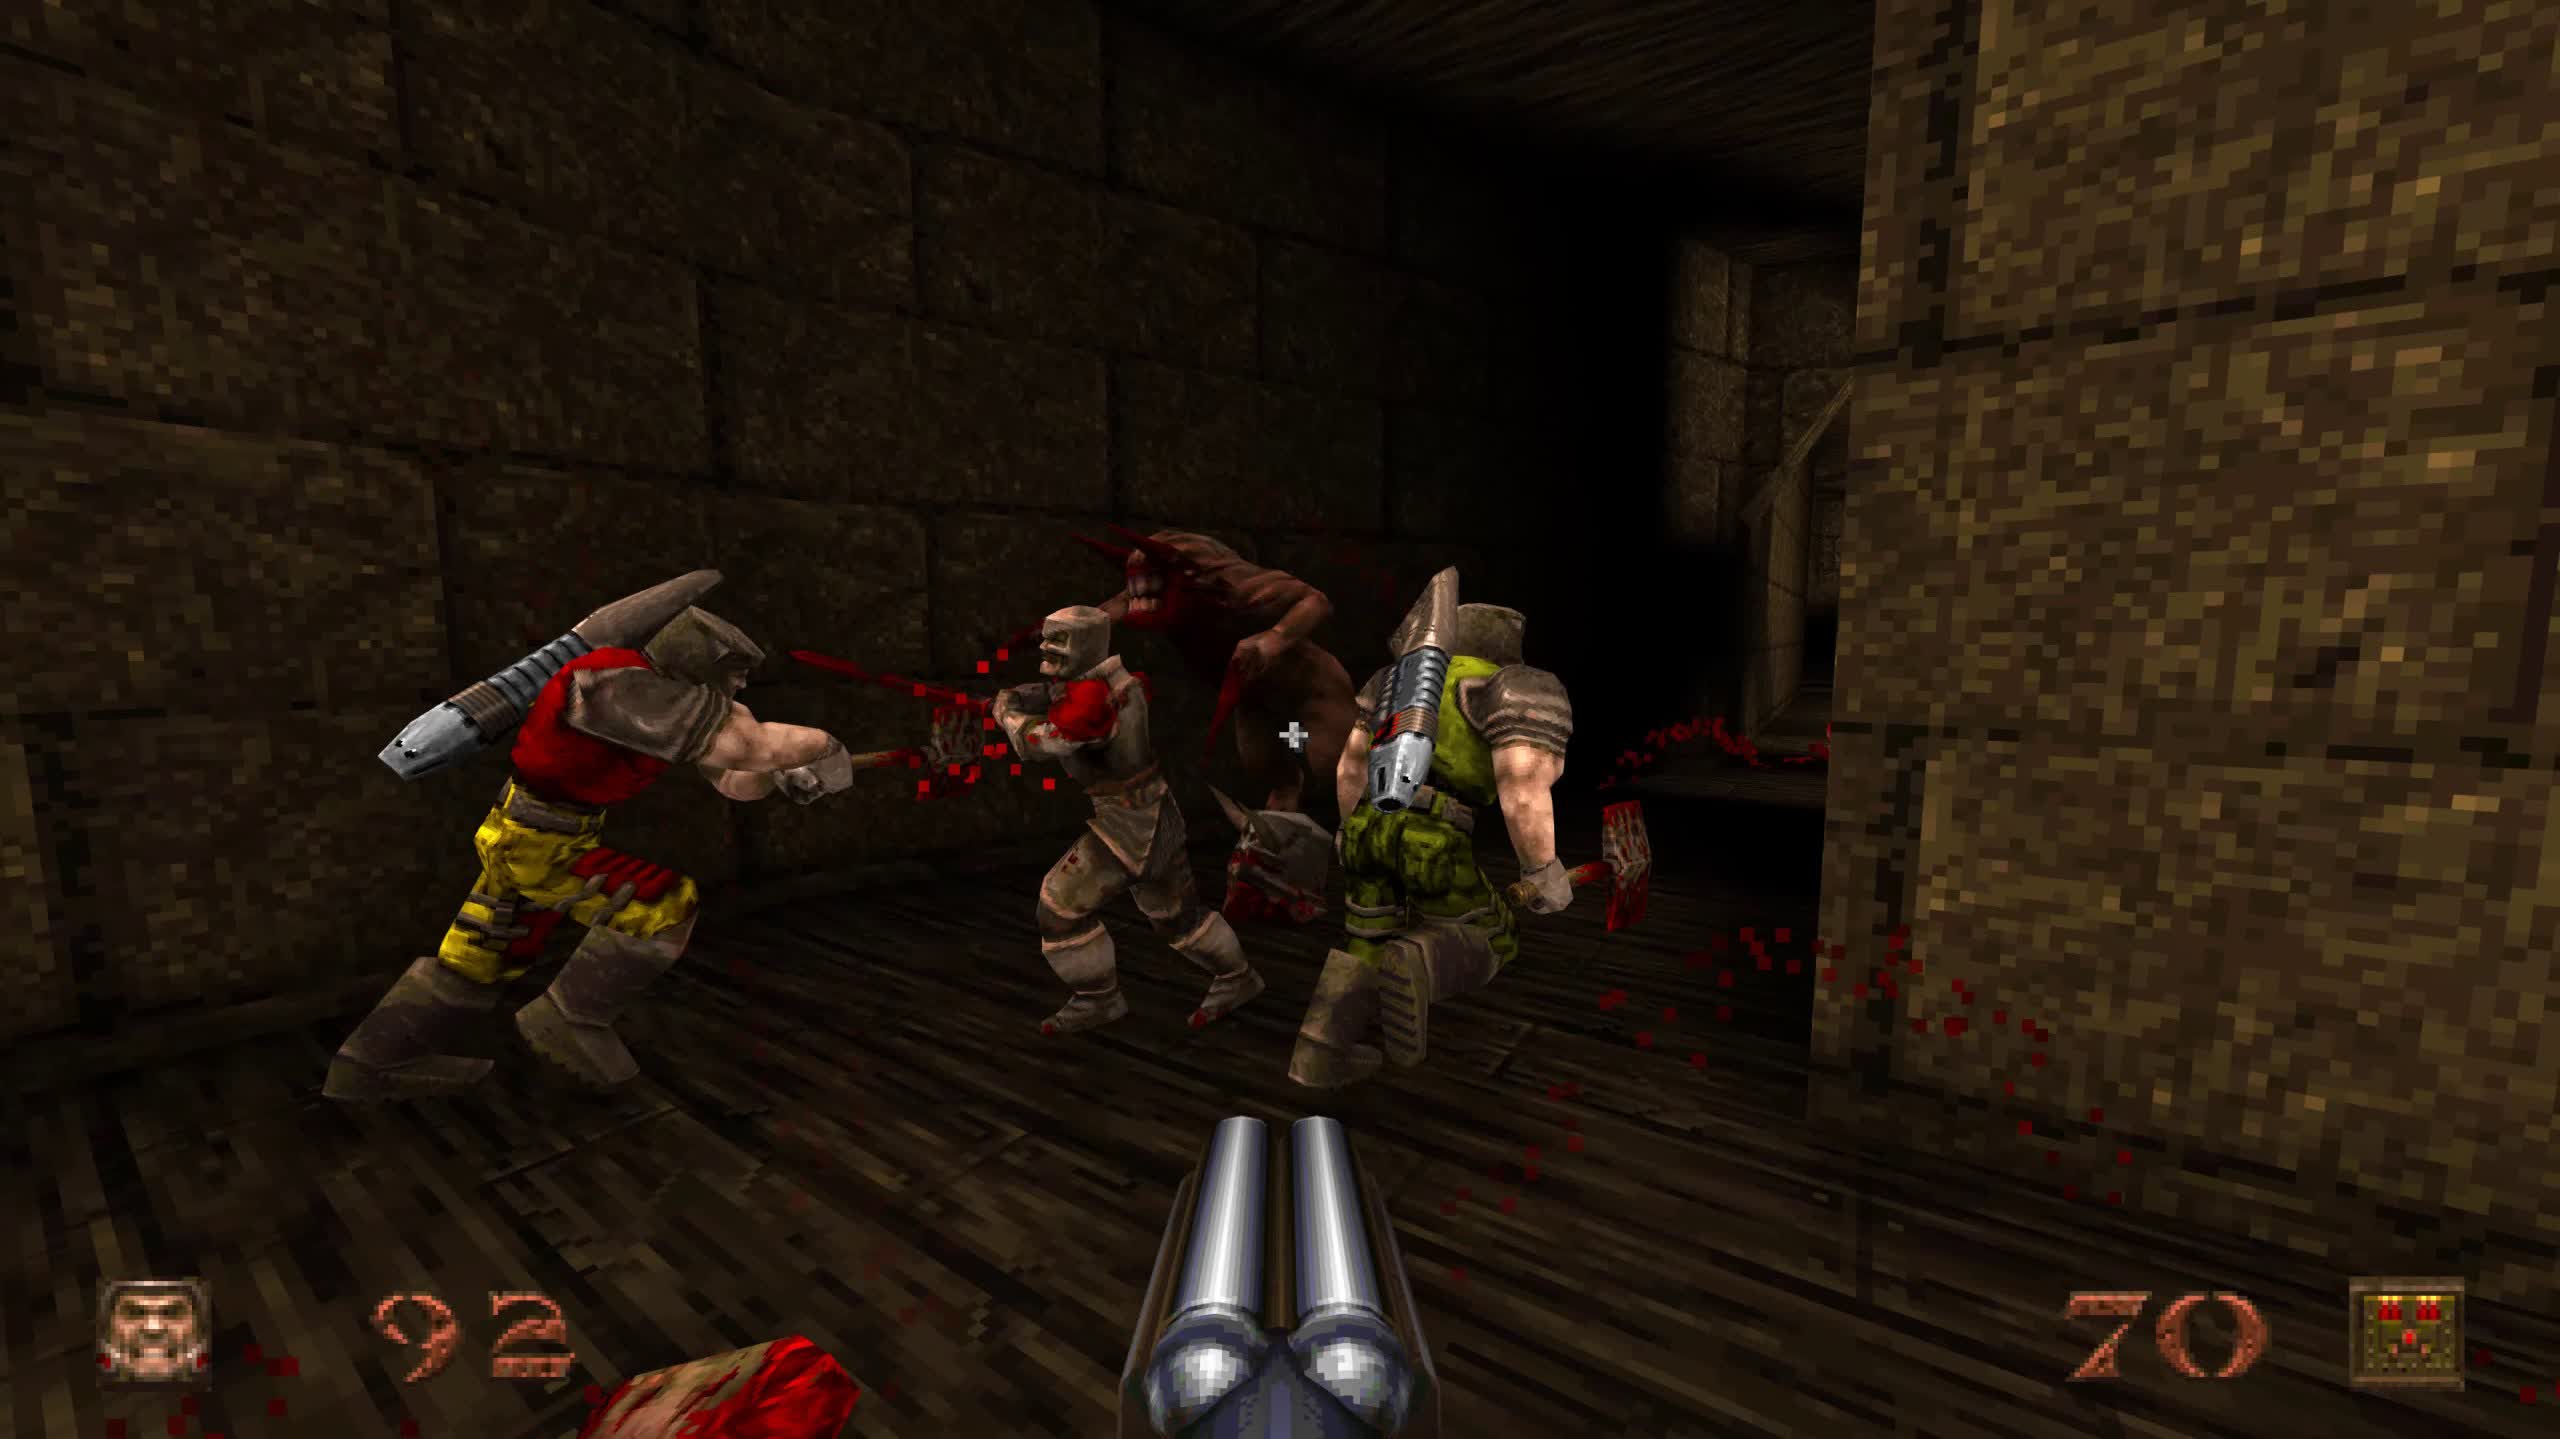 Quake adds accessibility features 26 years after its original release